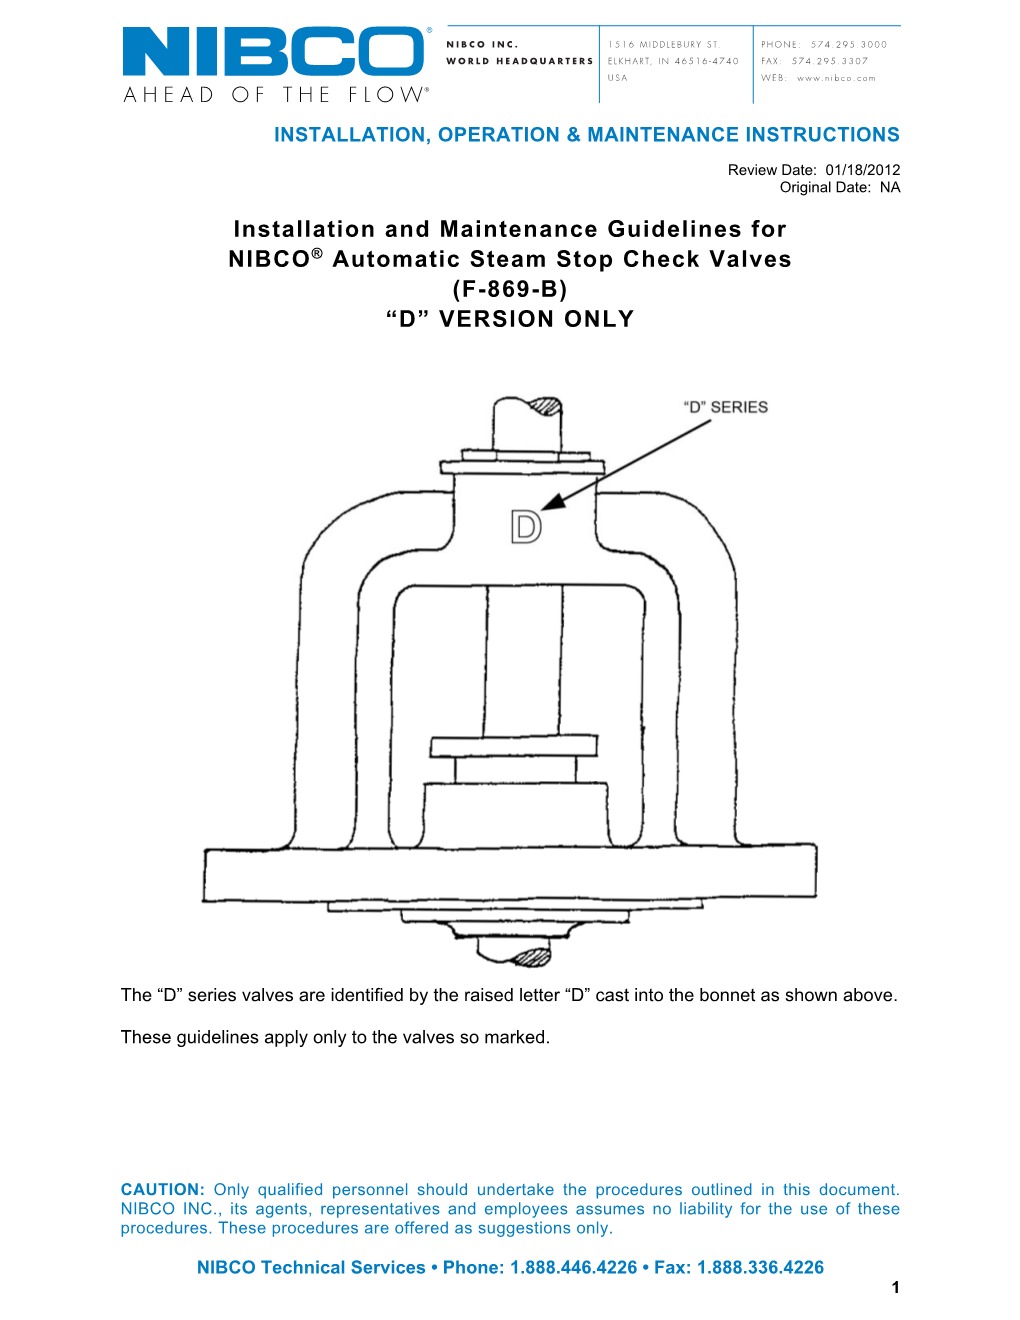 Installation and Maintenance Guidelines for NIBCO® Automatic Steam Stop Check Valves (F-869-B) “D” VERSION ONLY